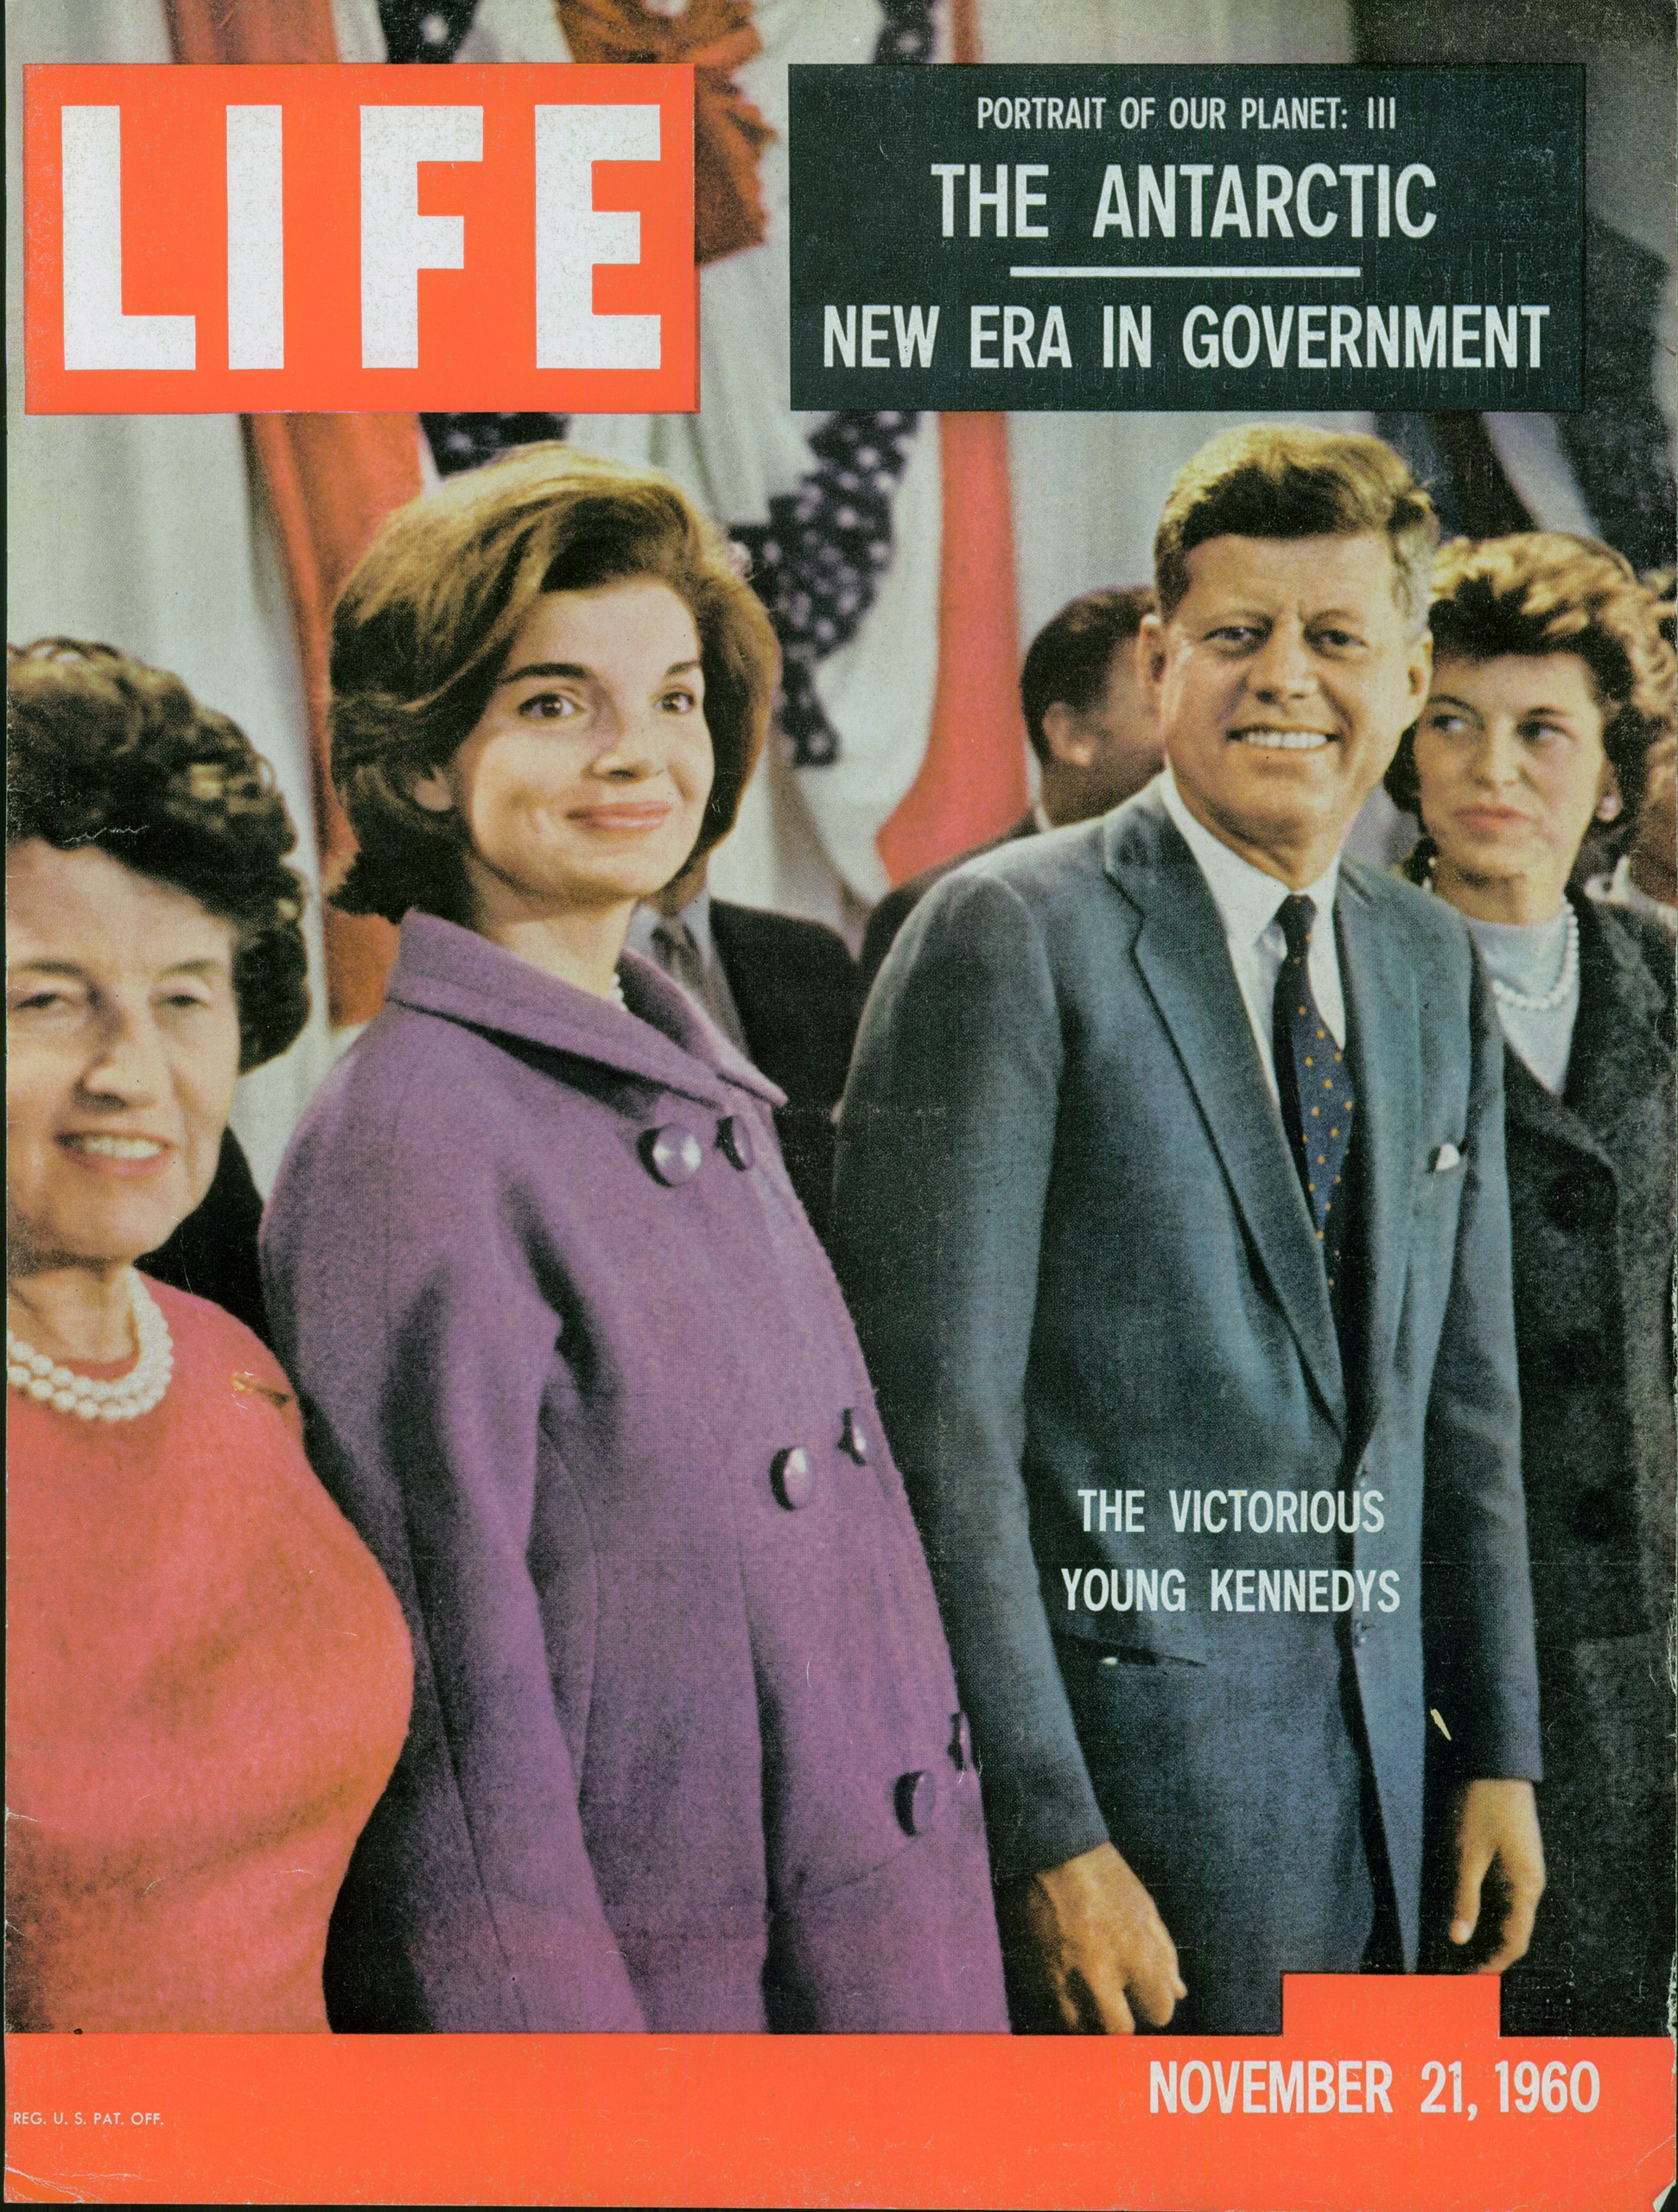 Nov. 21, 1960 cover of LIFE magazine. Cover photo by Paul Schutzer.